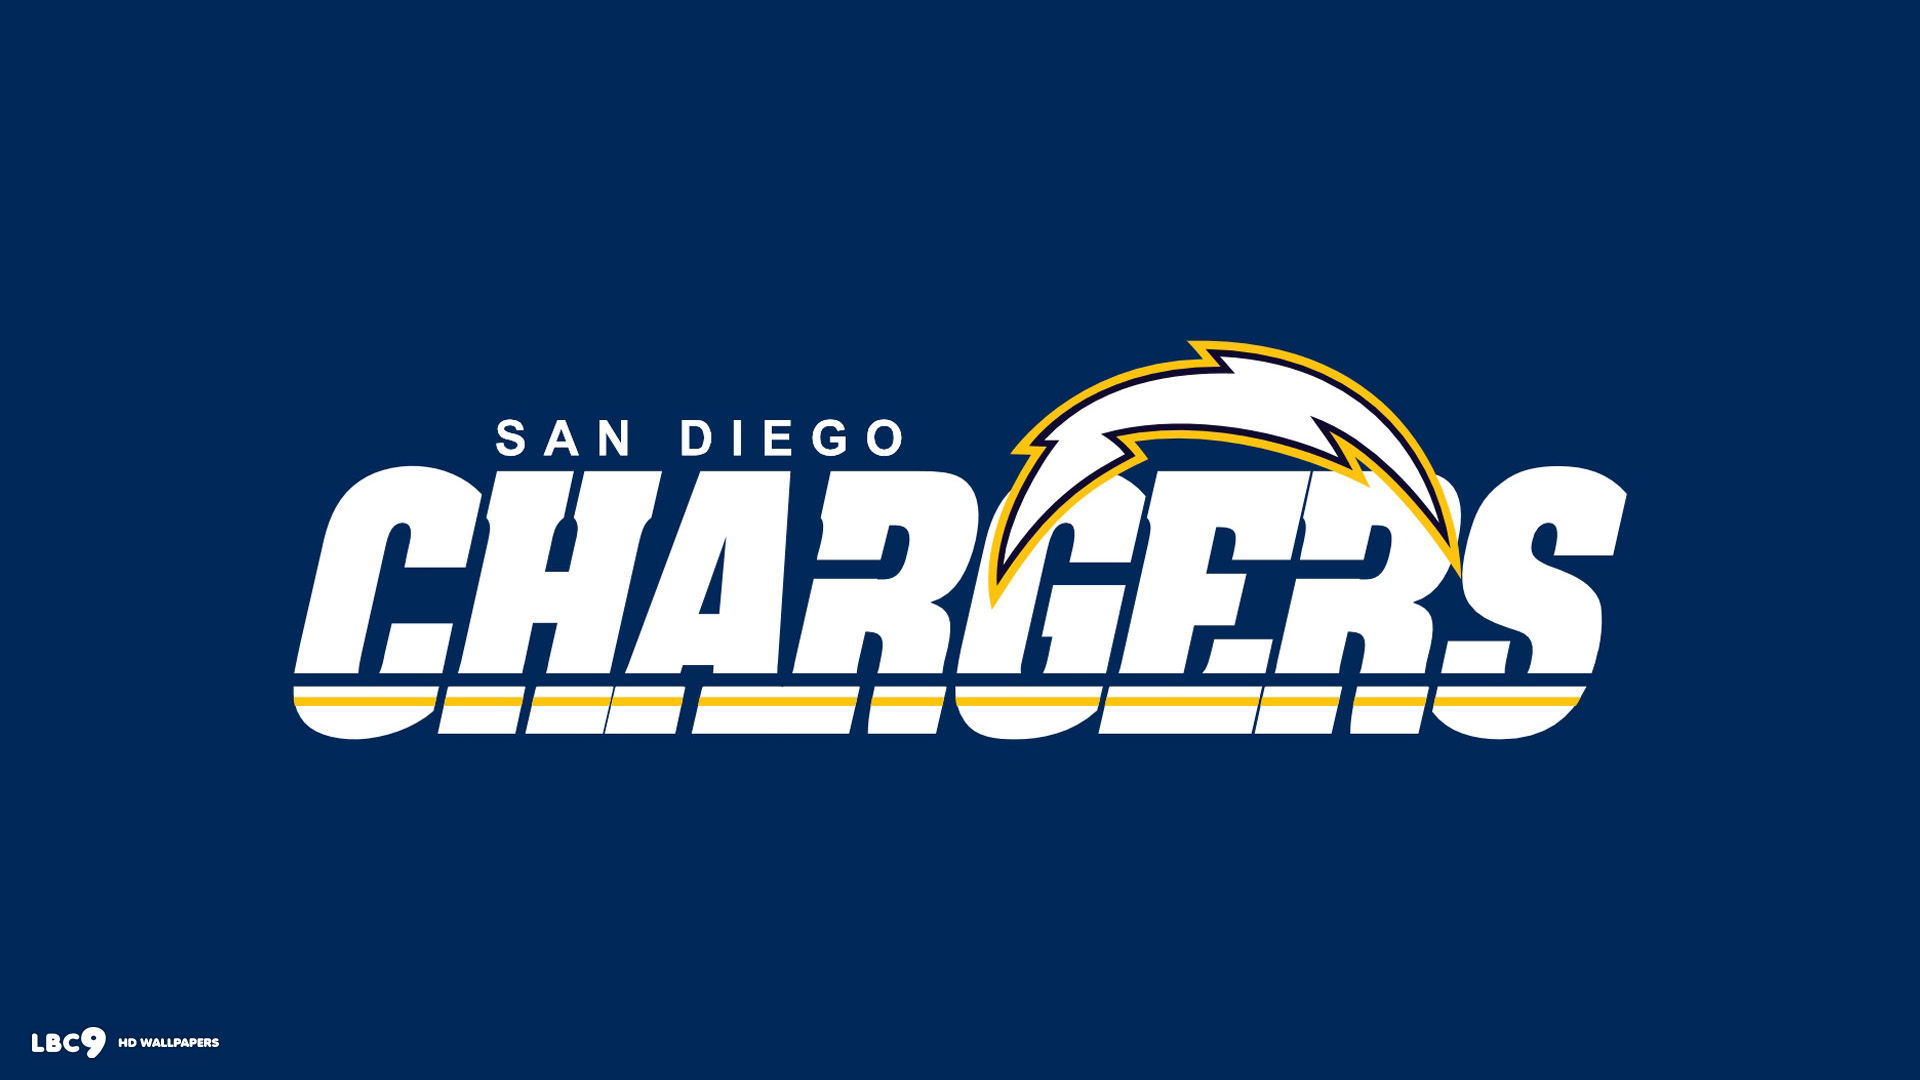 SAN DIEGO CHARGERS nfl football by wallpaperupcom